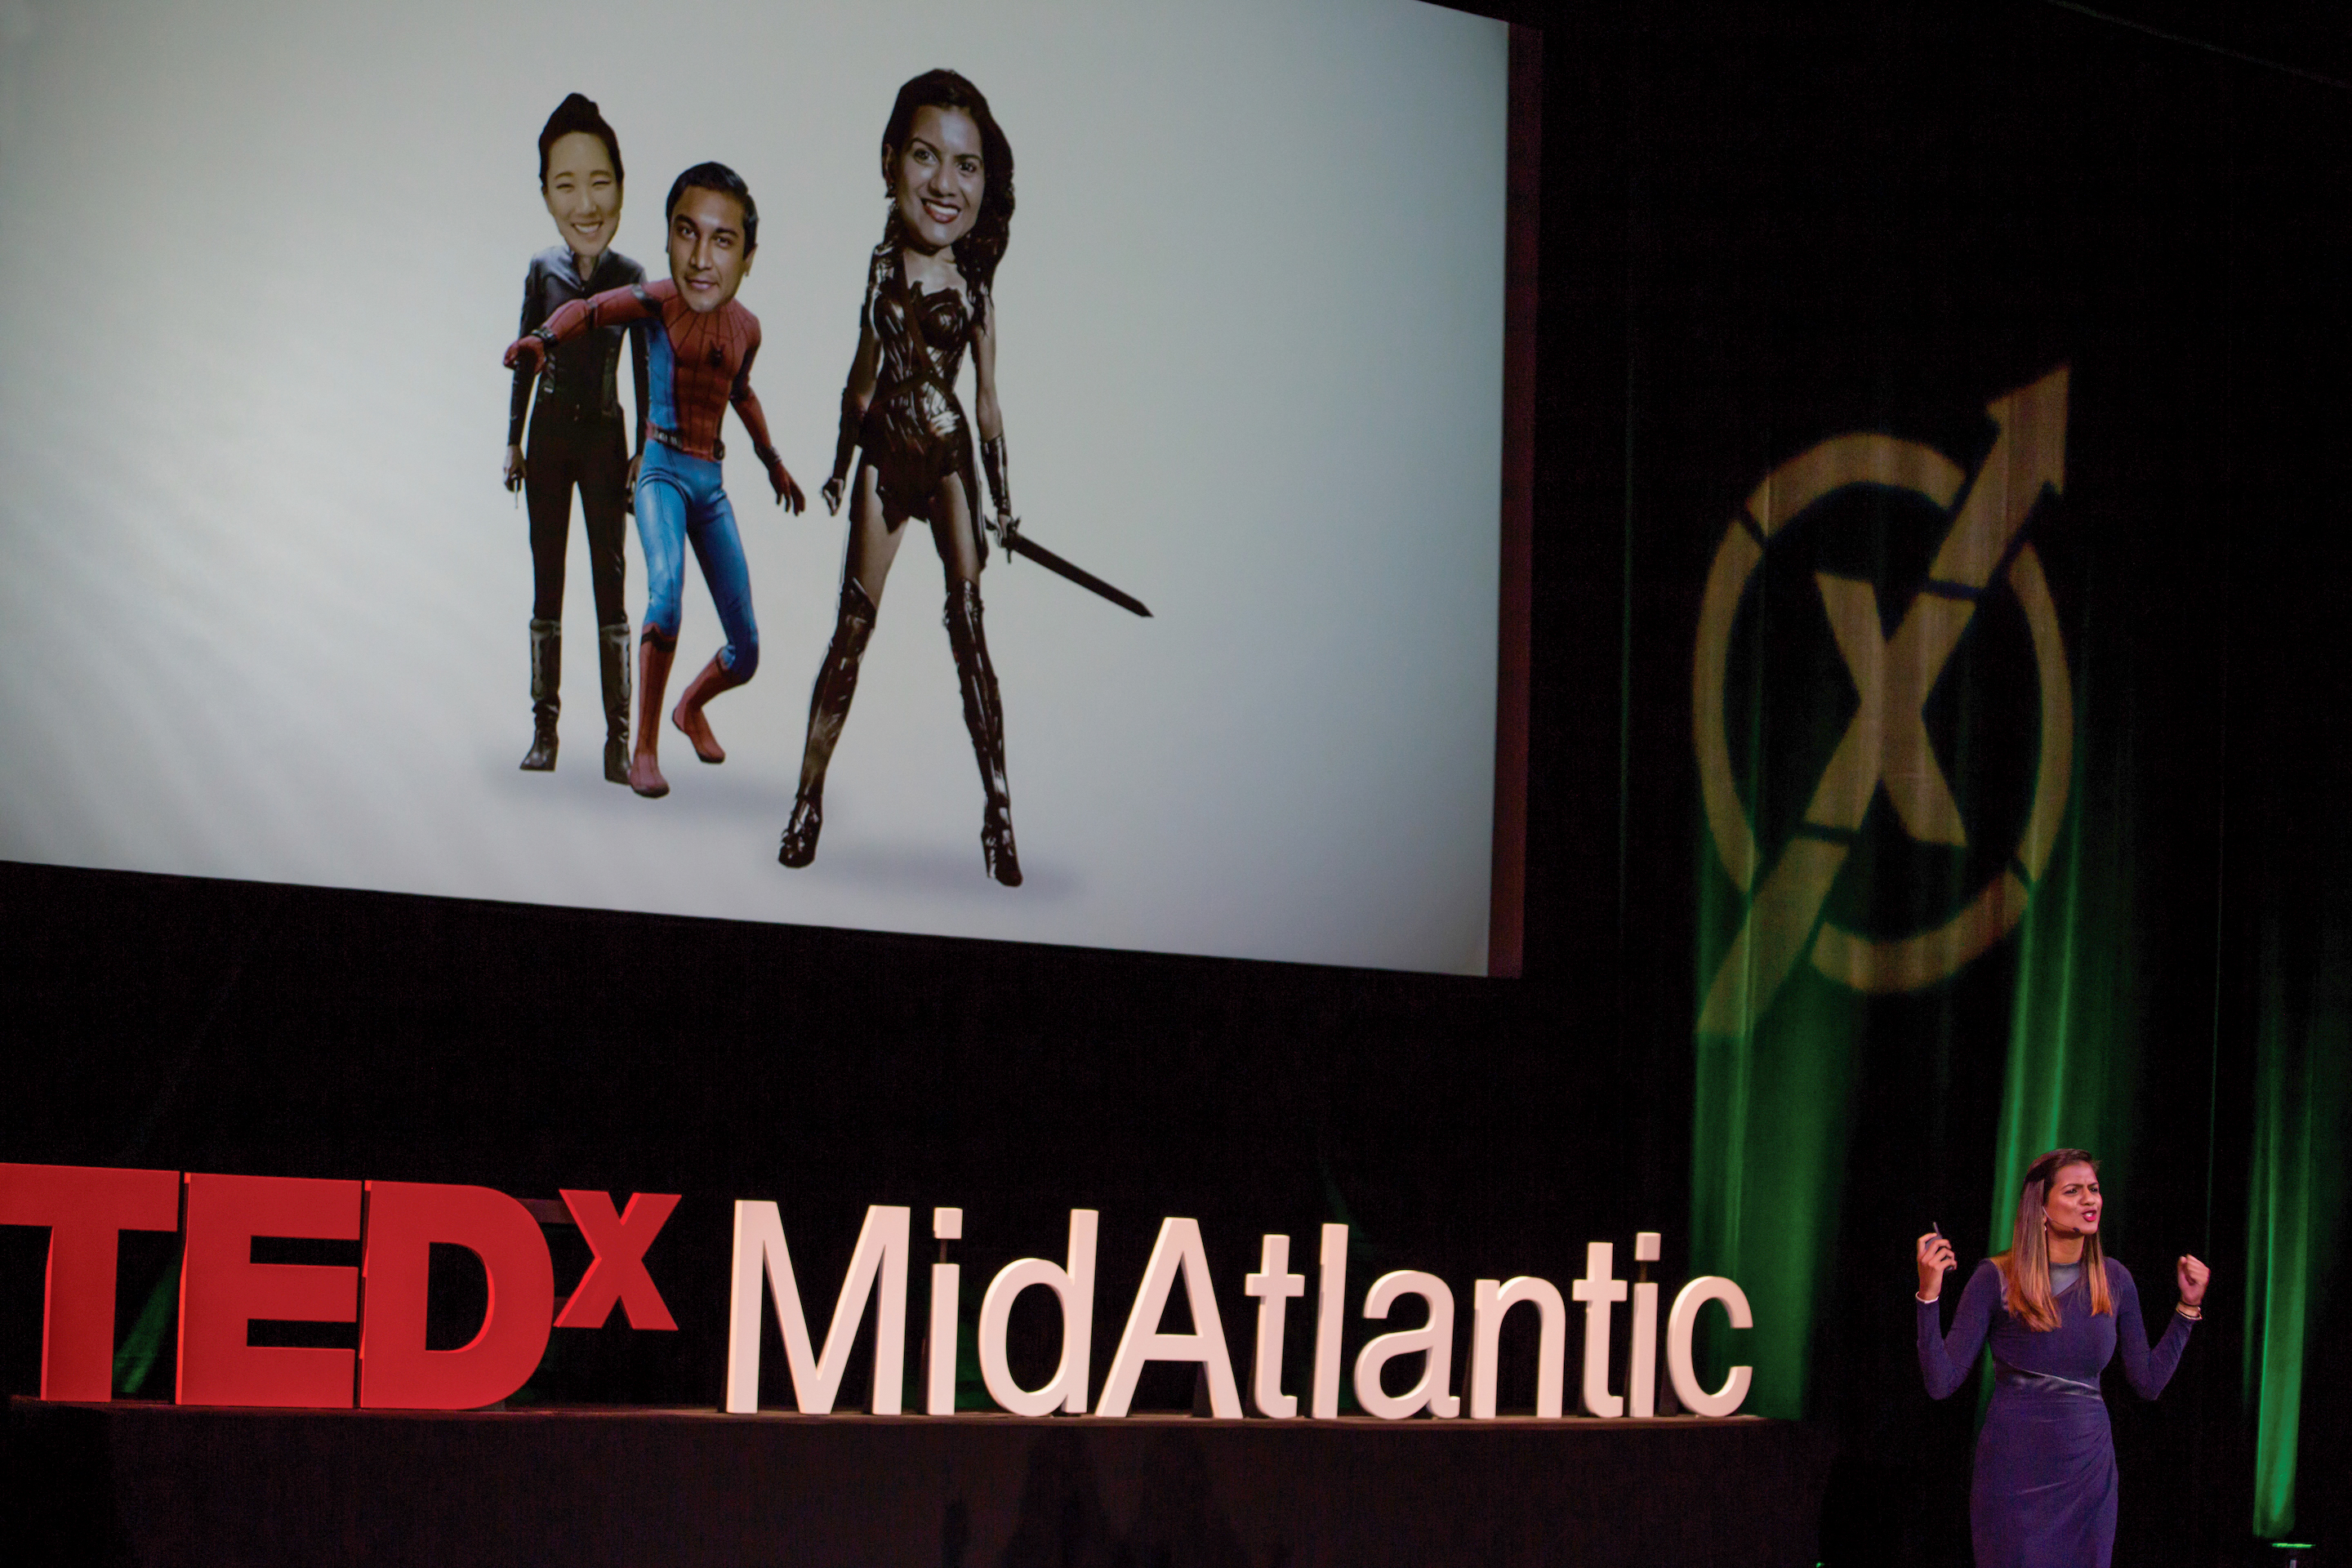 Hasini on stage presenting at Ted-X Midatlantic in front of an image collage by Martin Rietveld